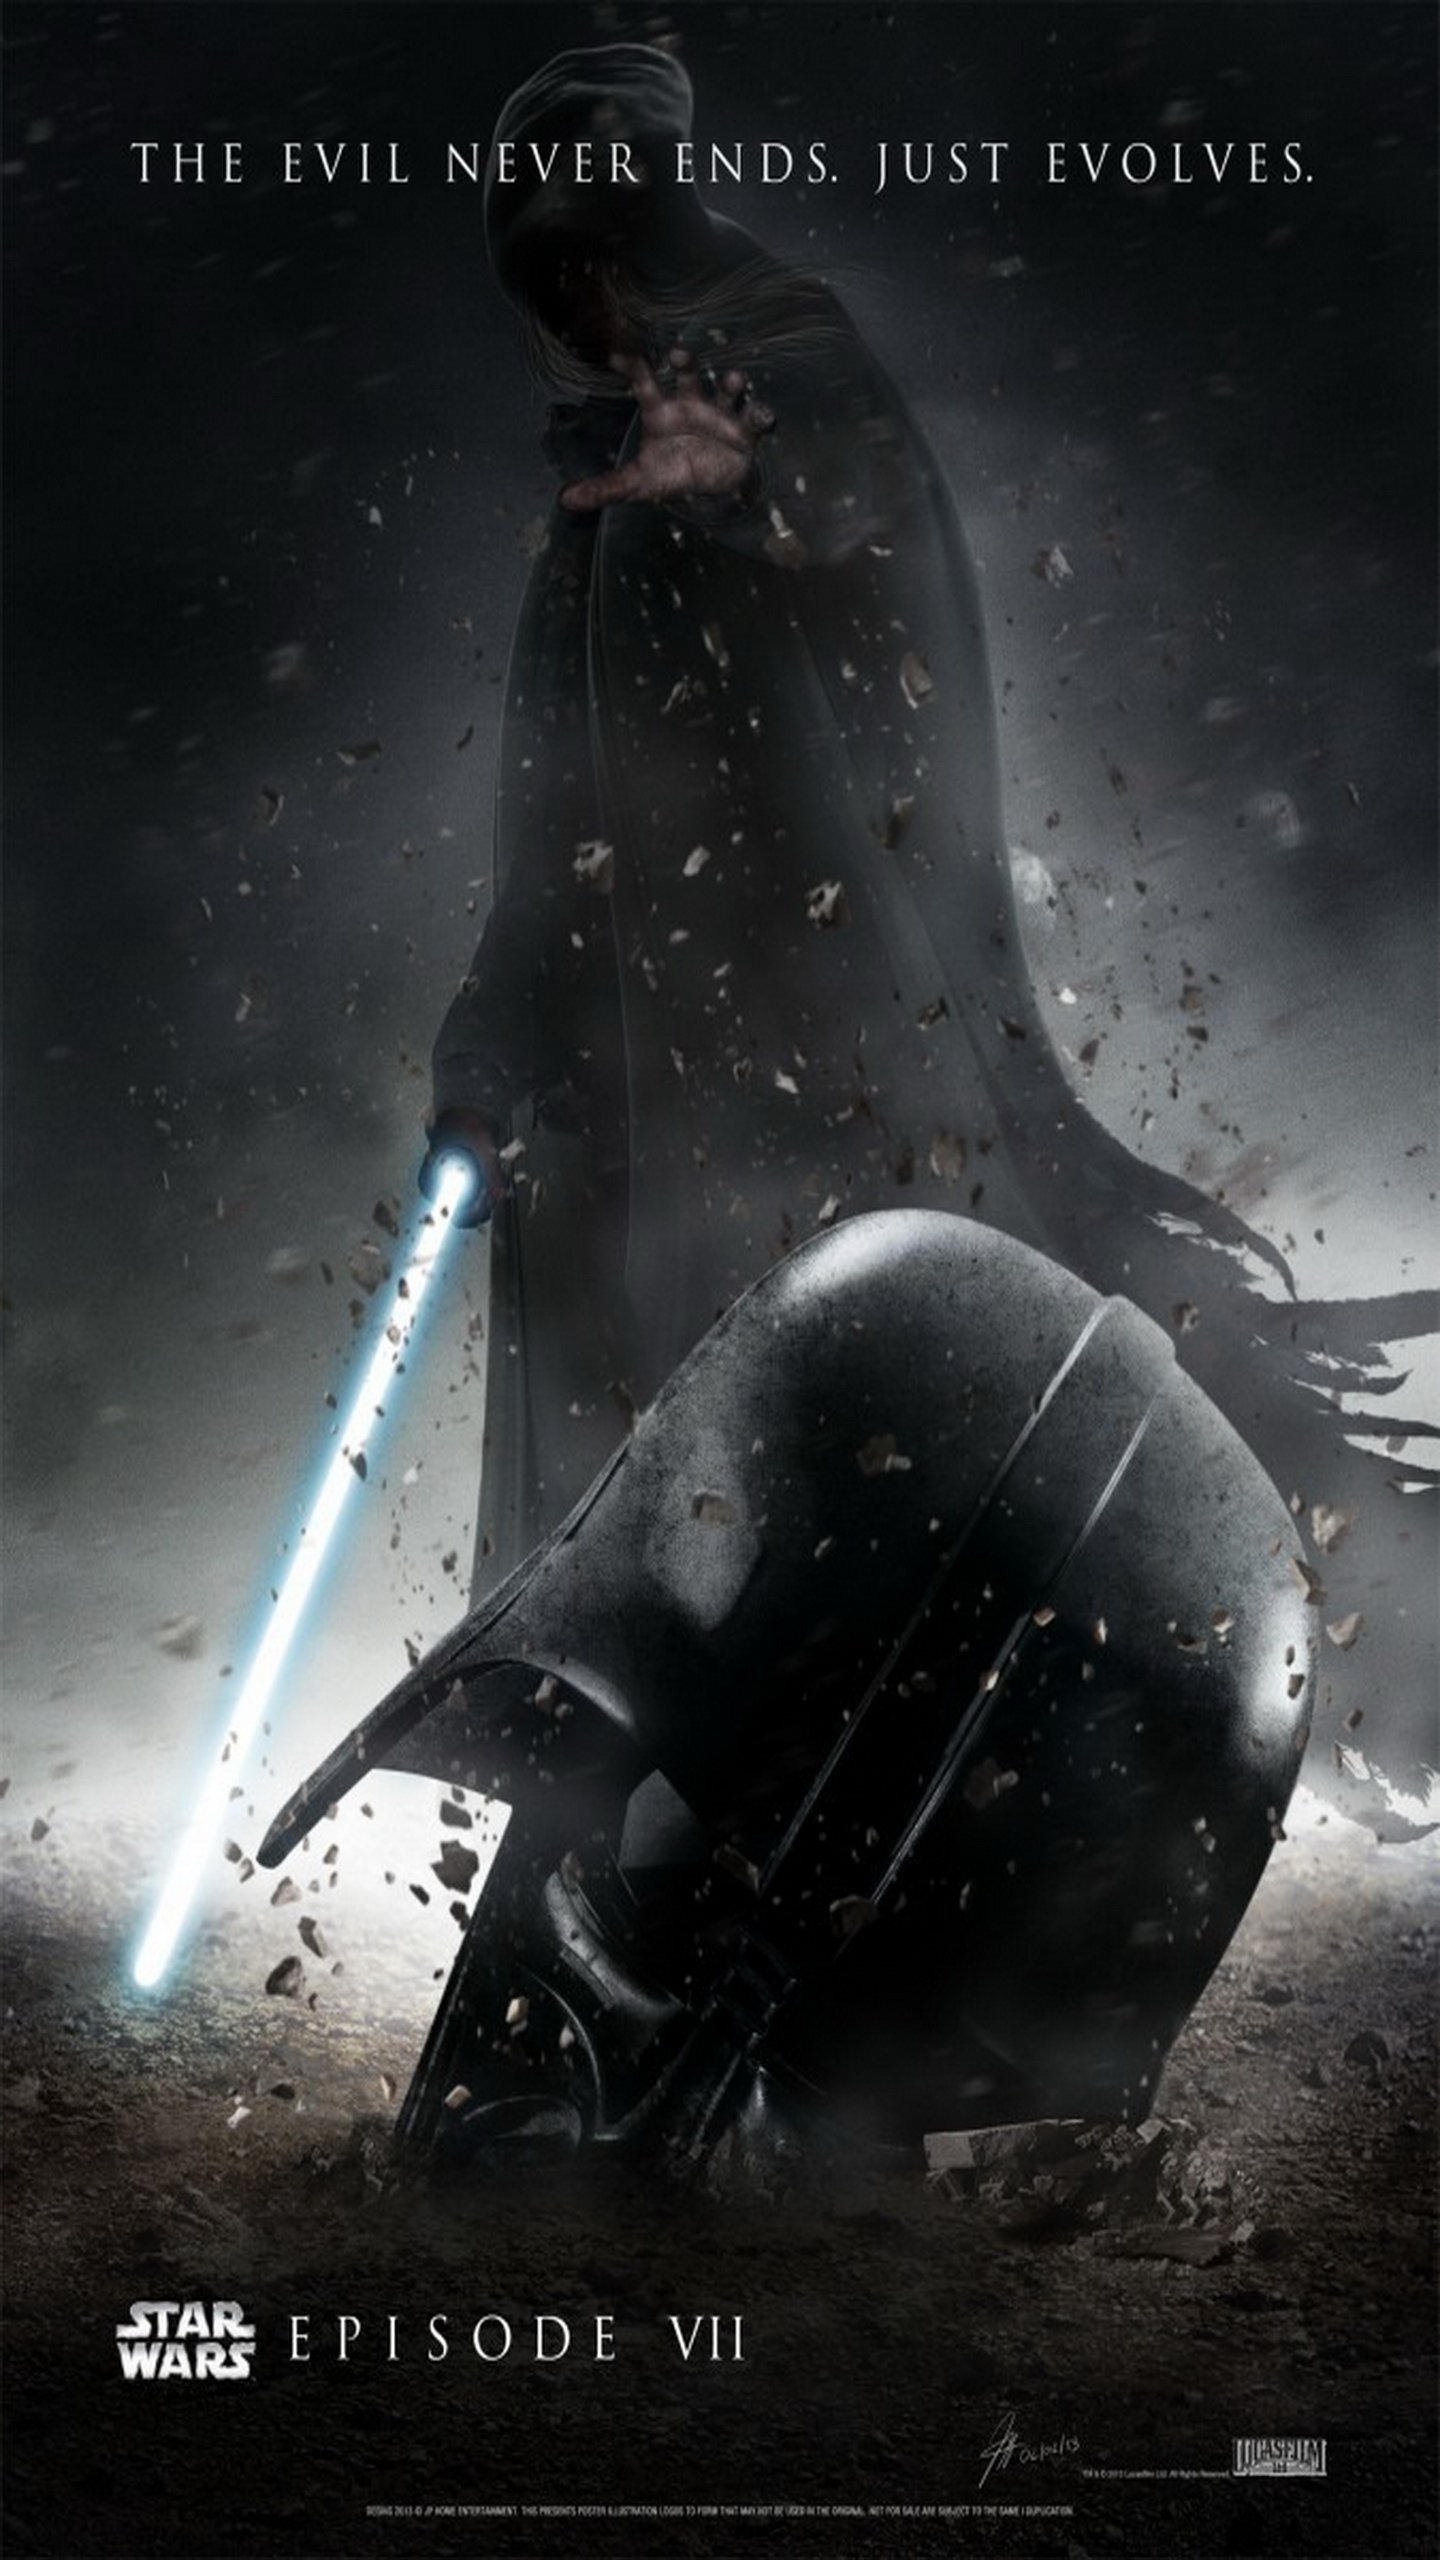  Episode VII The Force Awakens 2015 Poster Galaxy Note Wallpaper 1440x2560